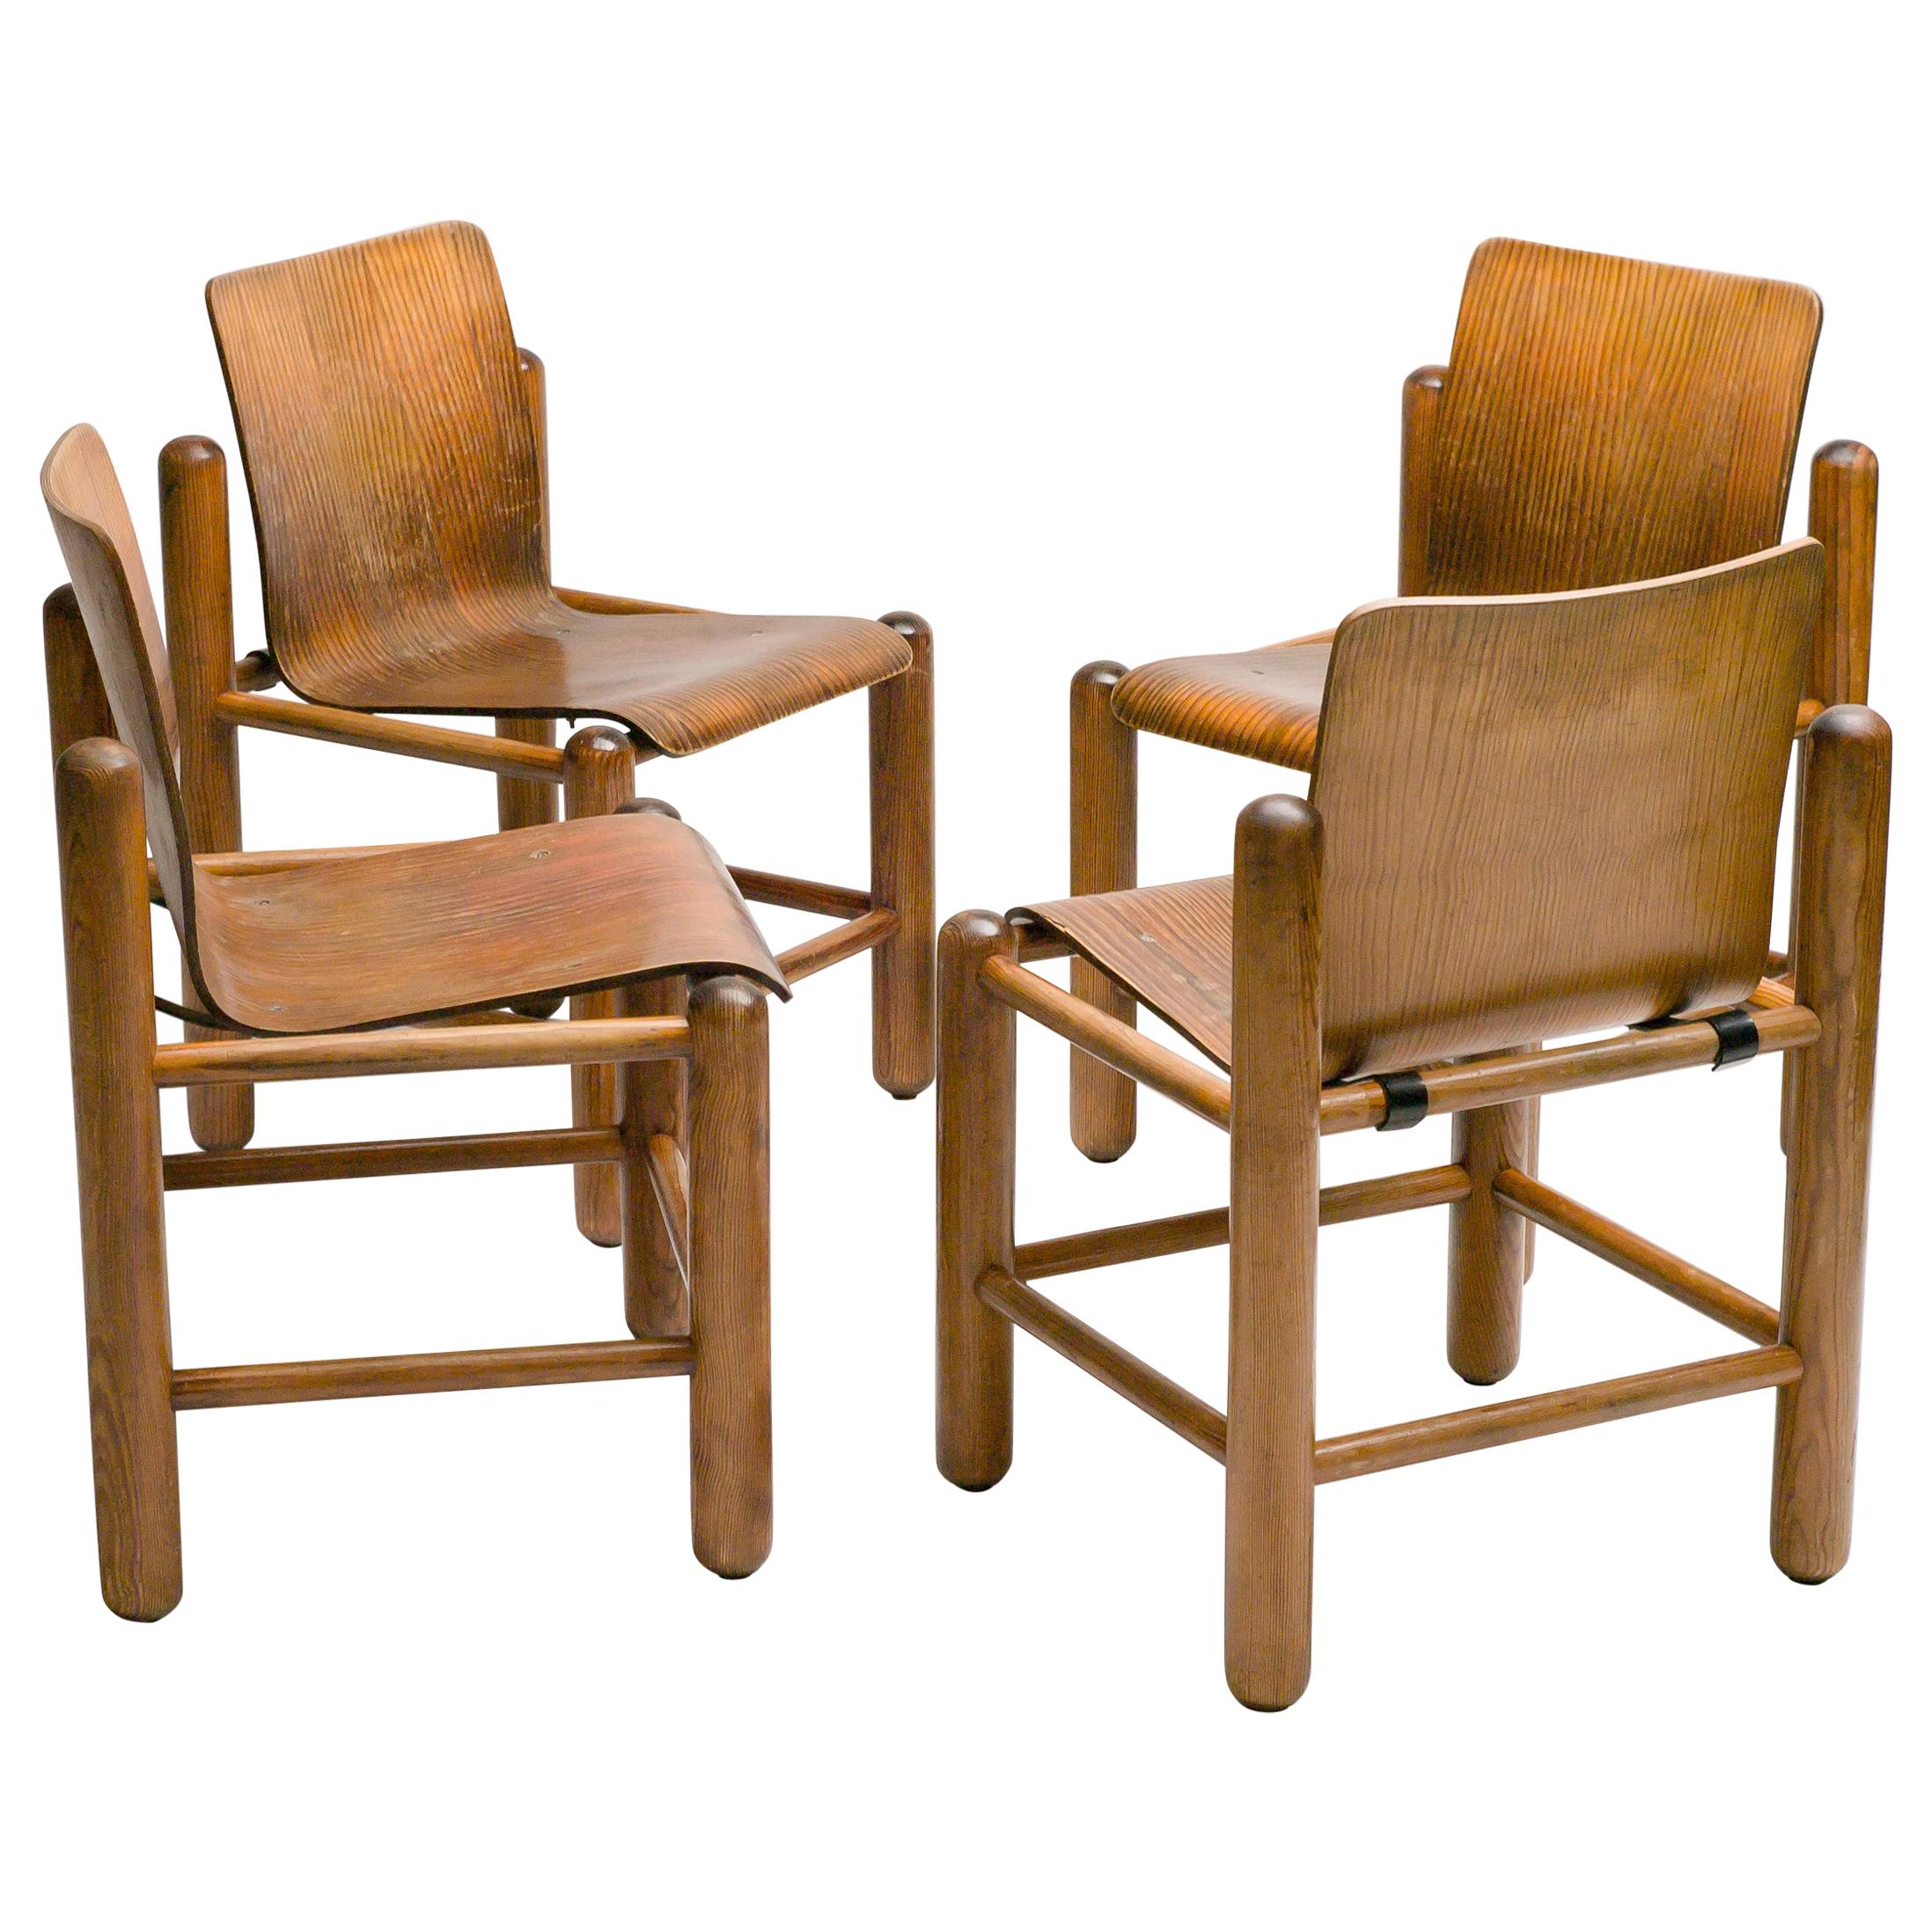 Set of Four Norwegian Plywood Chairs